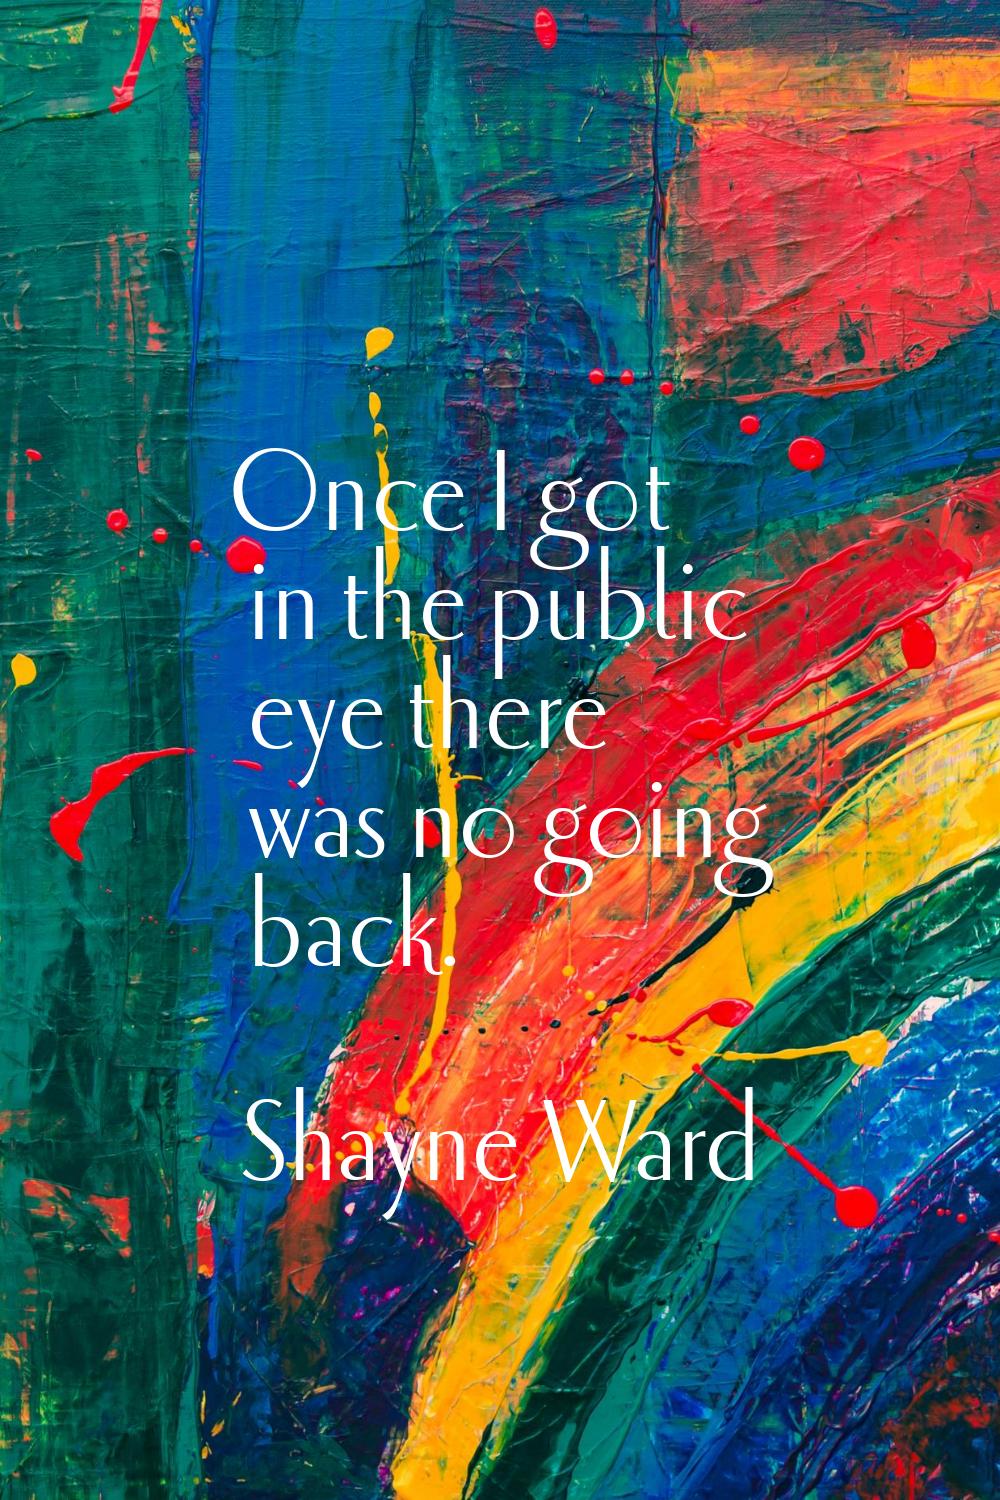 Once I got in the public eye there was no going back.